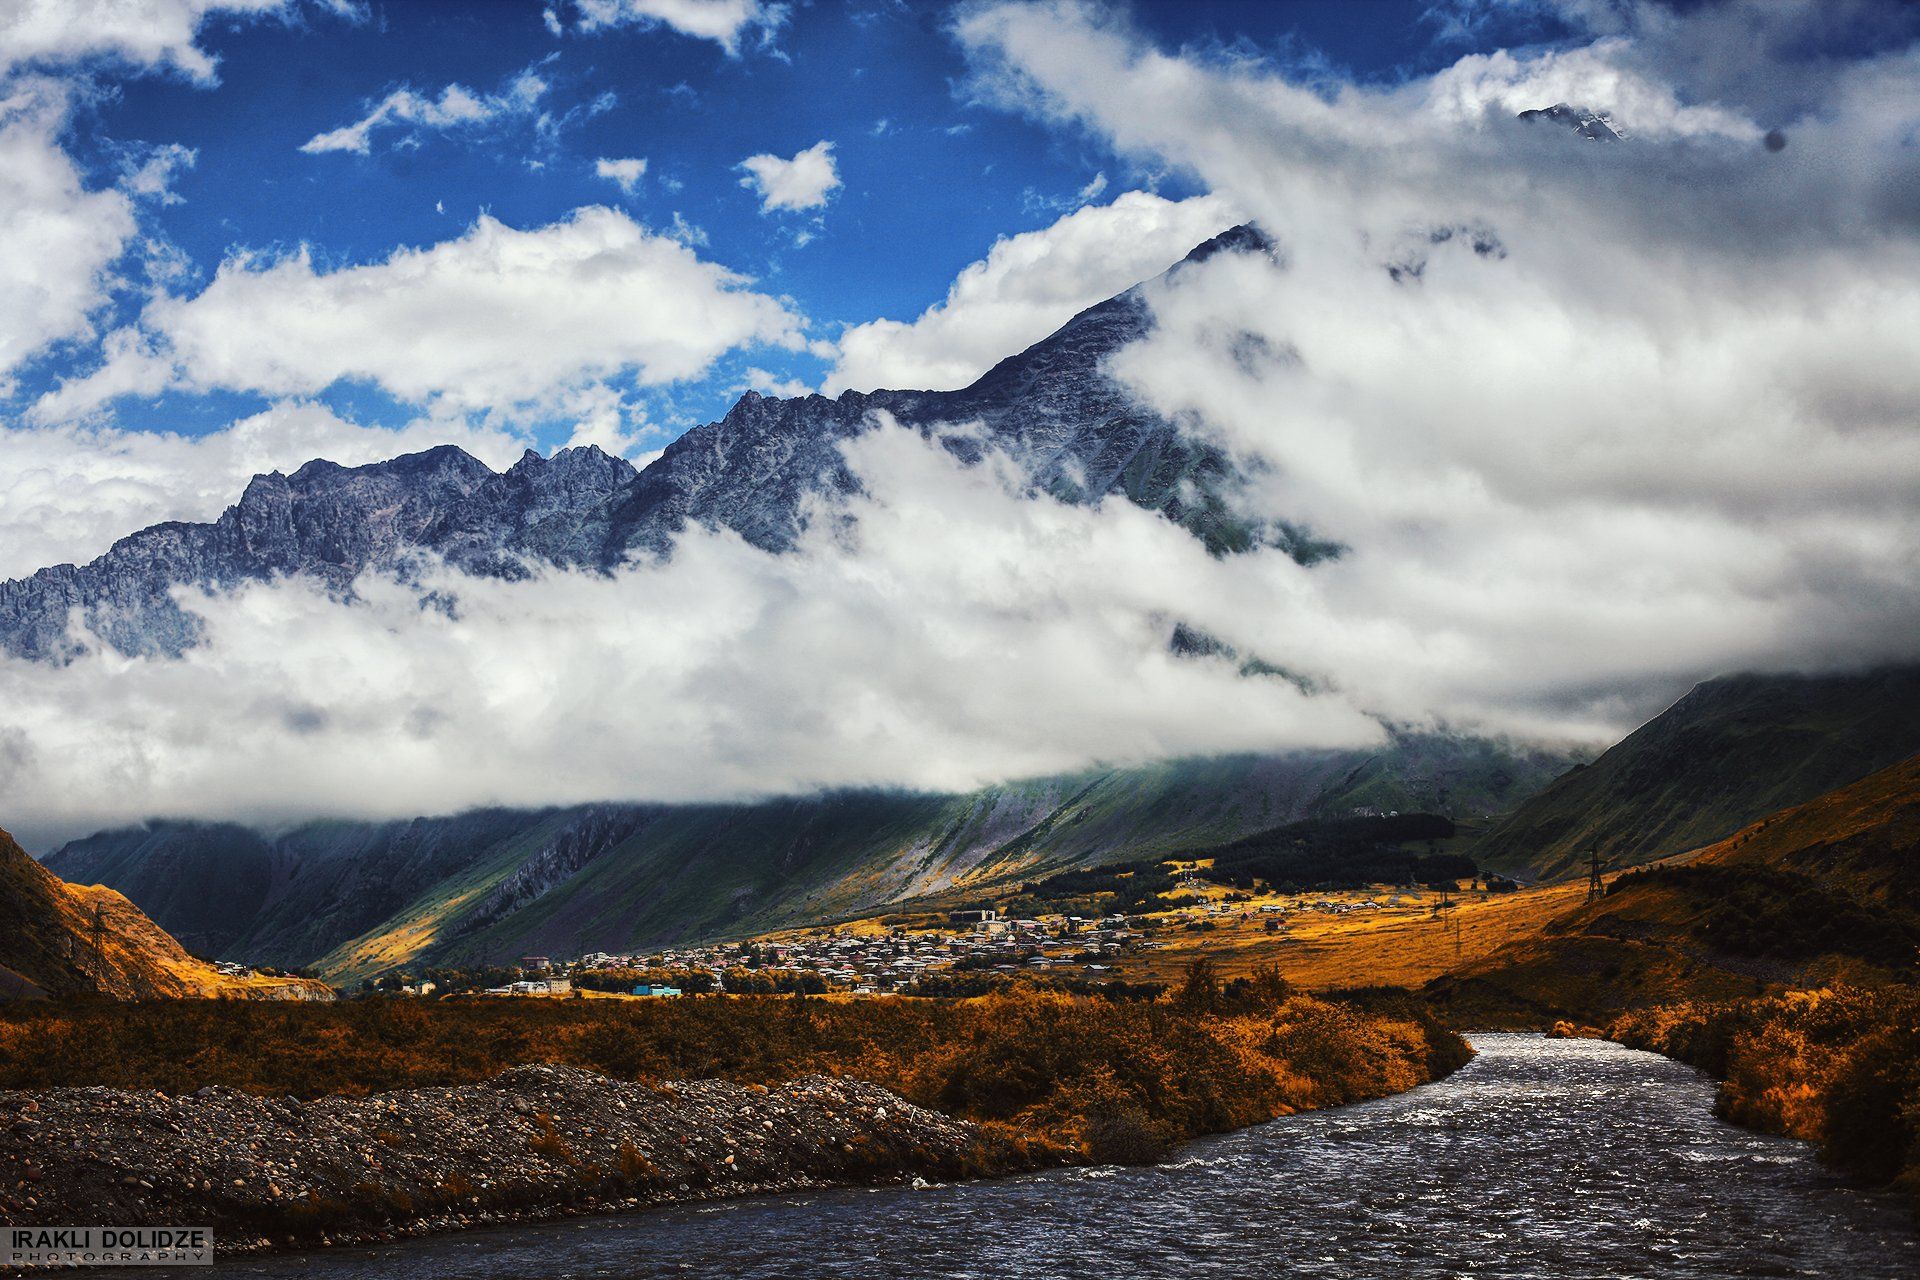 landscape, mountain, river, outdoor, hiking, canon, photography, colored, autumn, clouds, sky,, ირაკლი დოლიძე